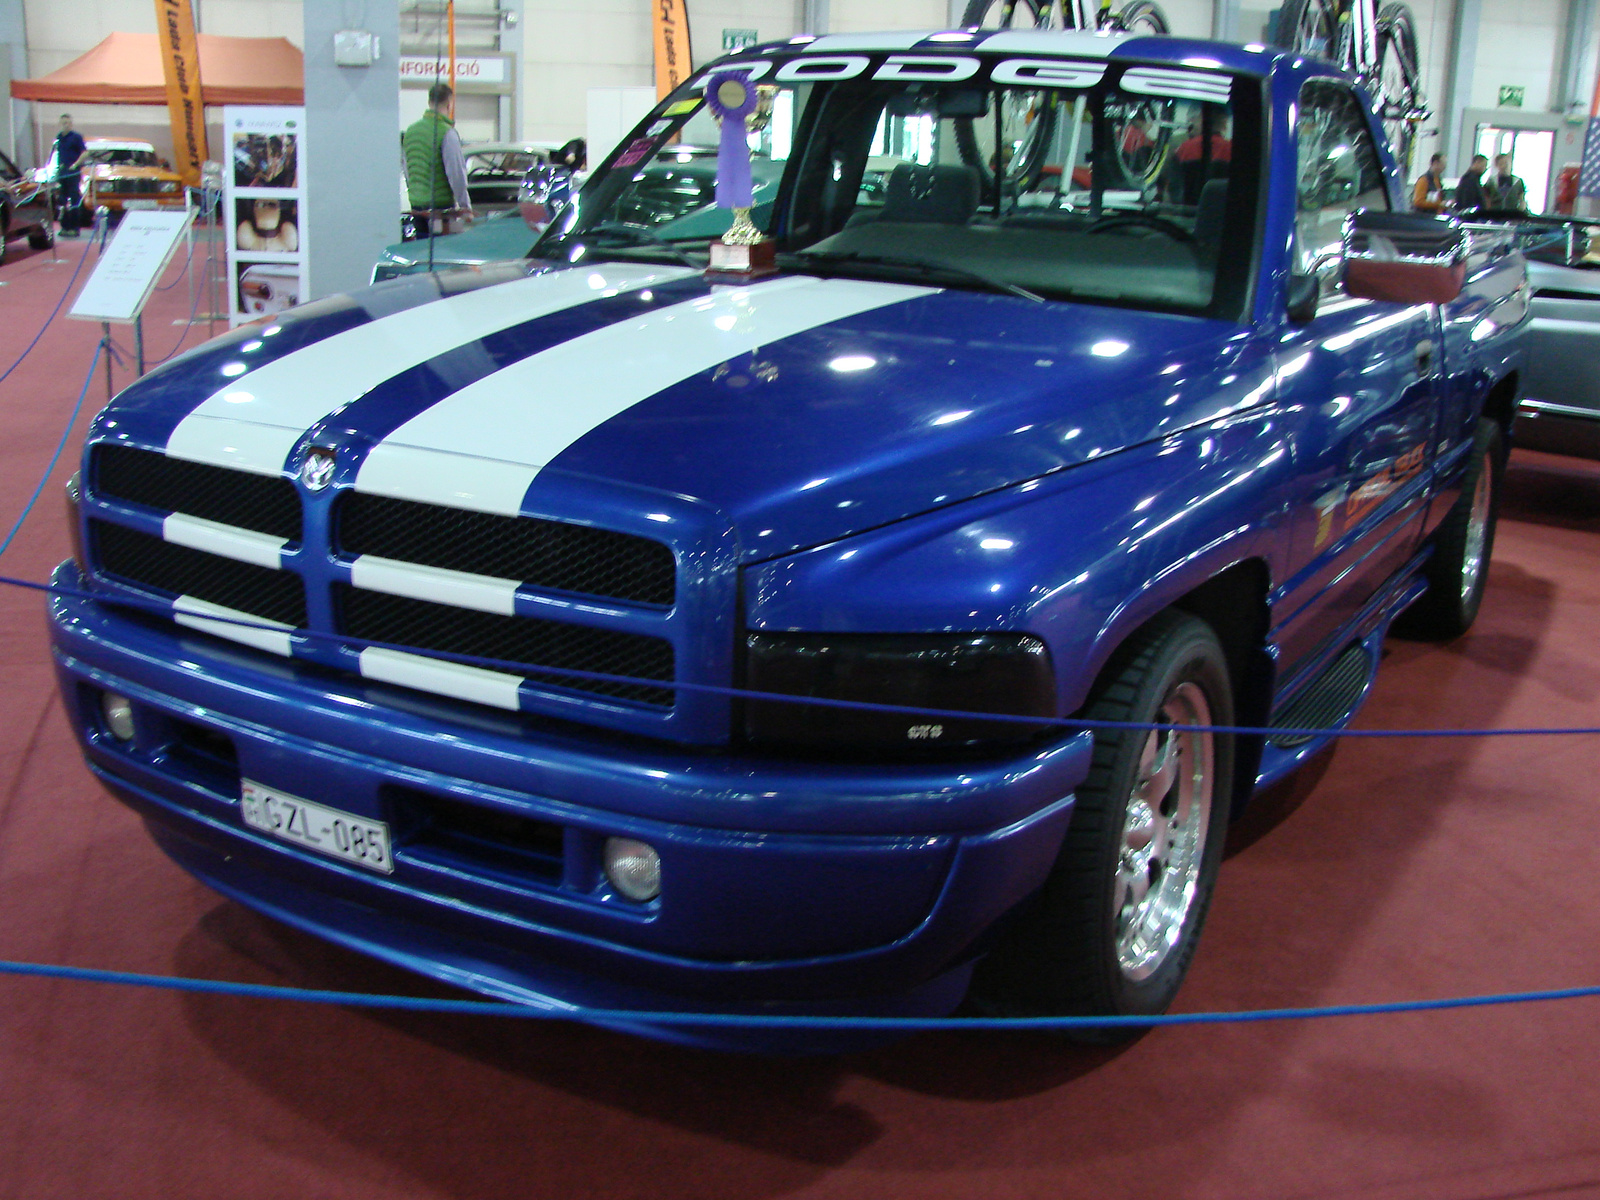 Dodge Ram Indy 500 Pace Truck Edition